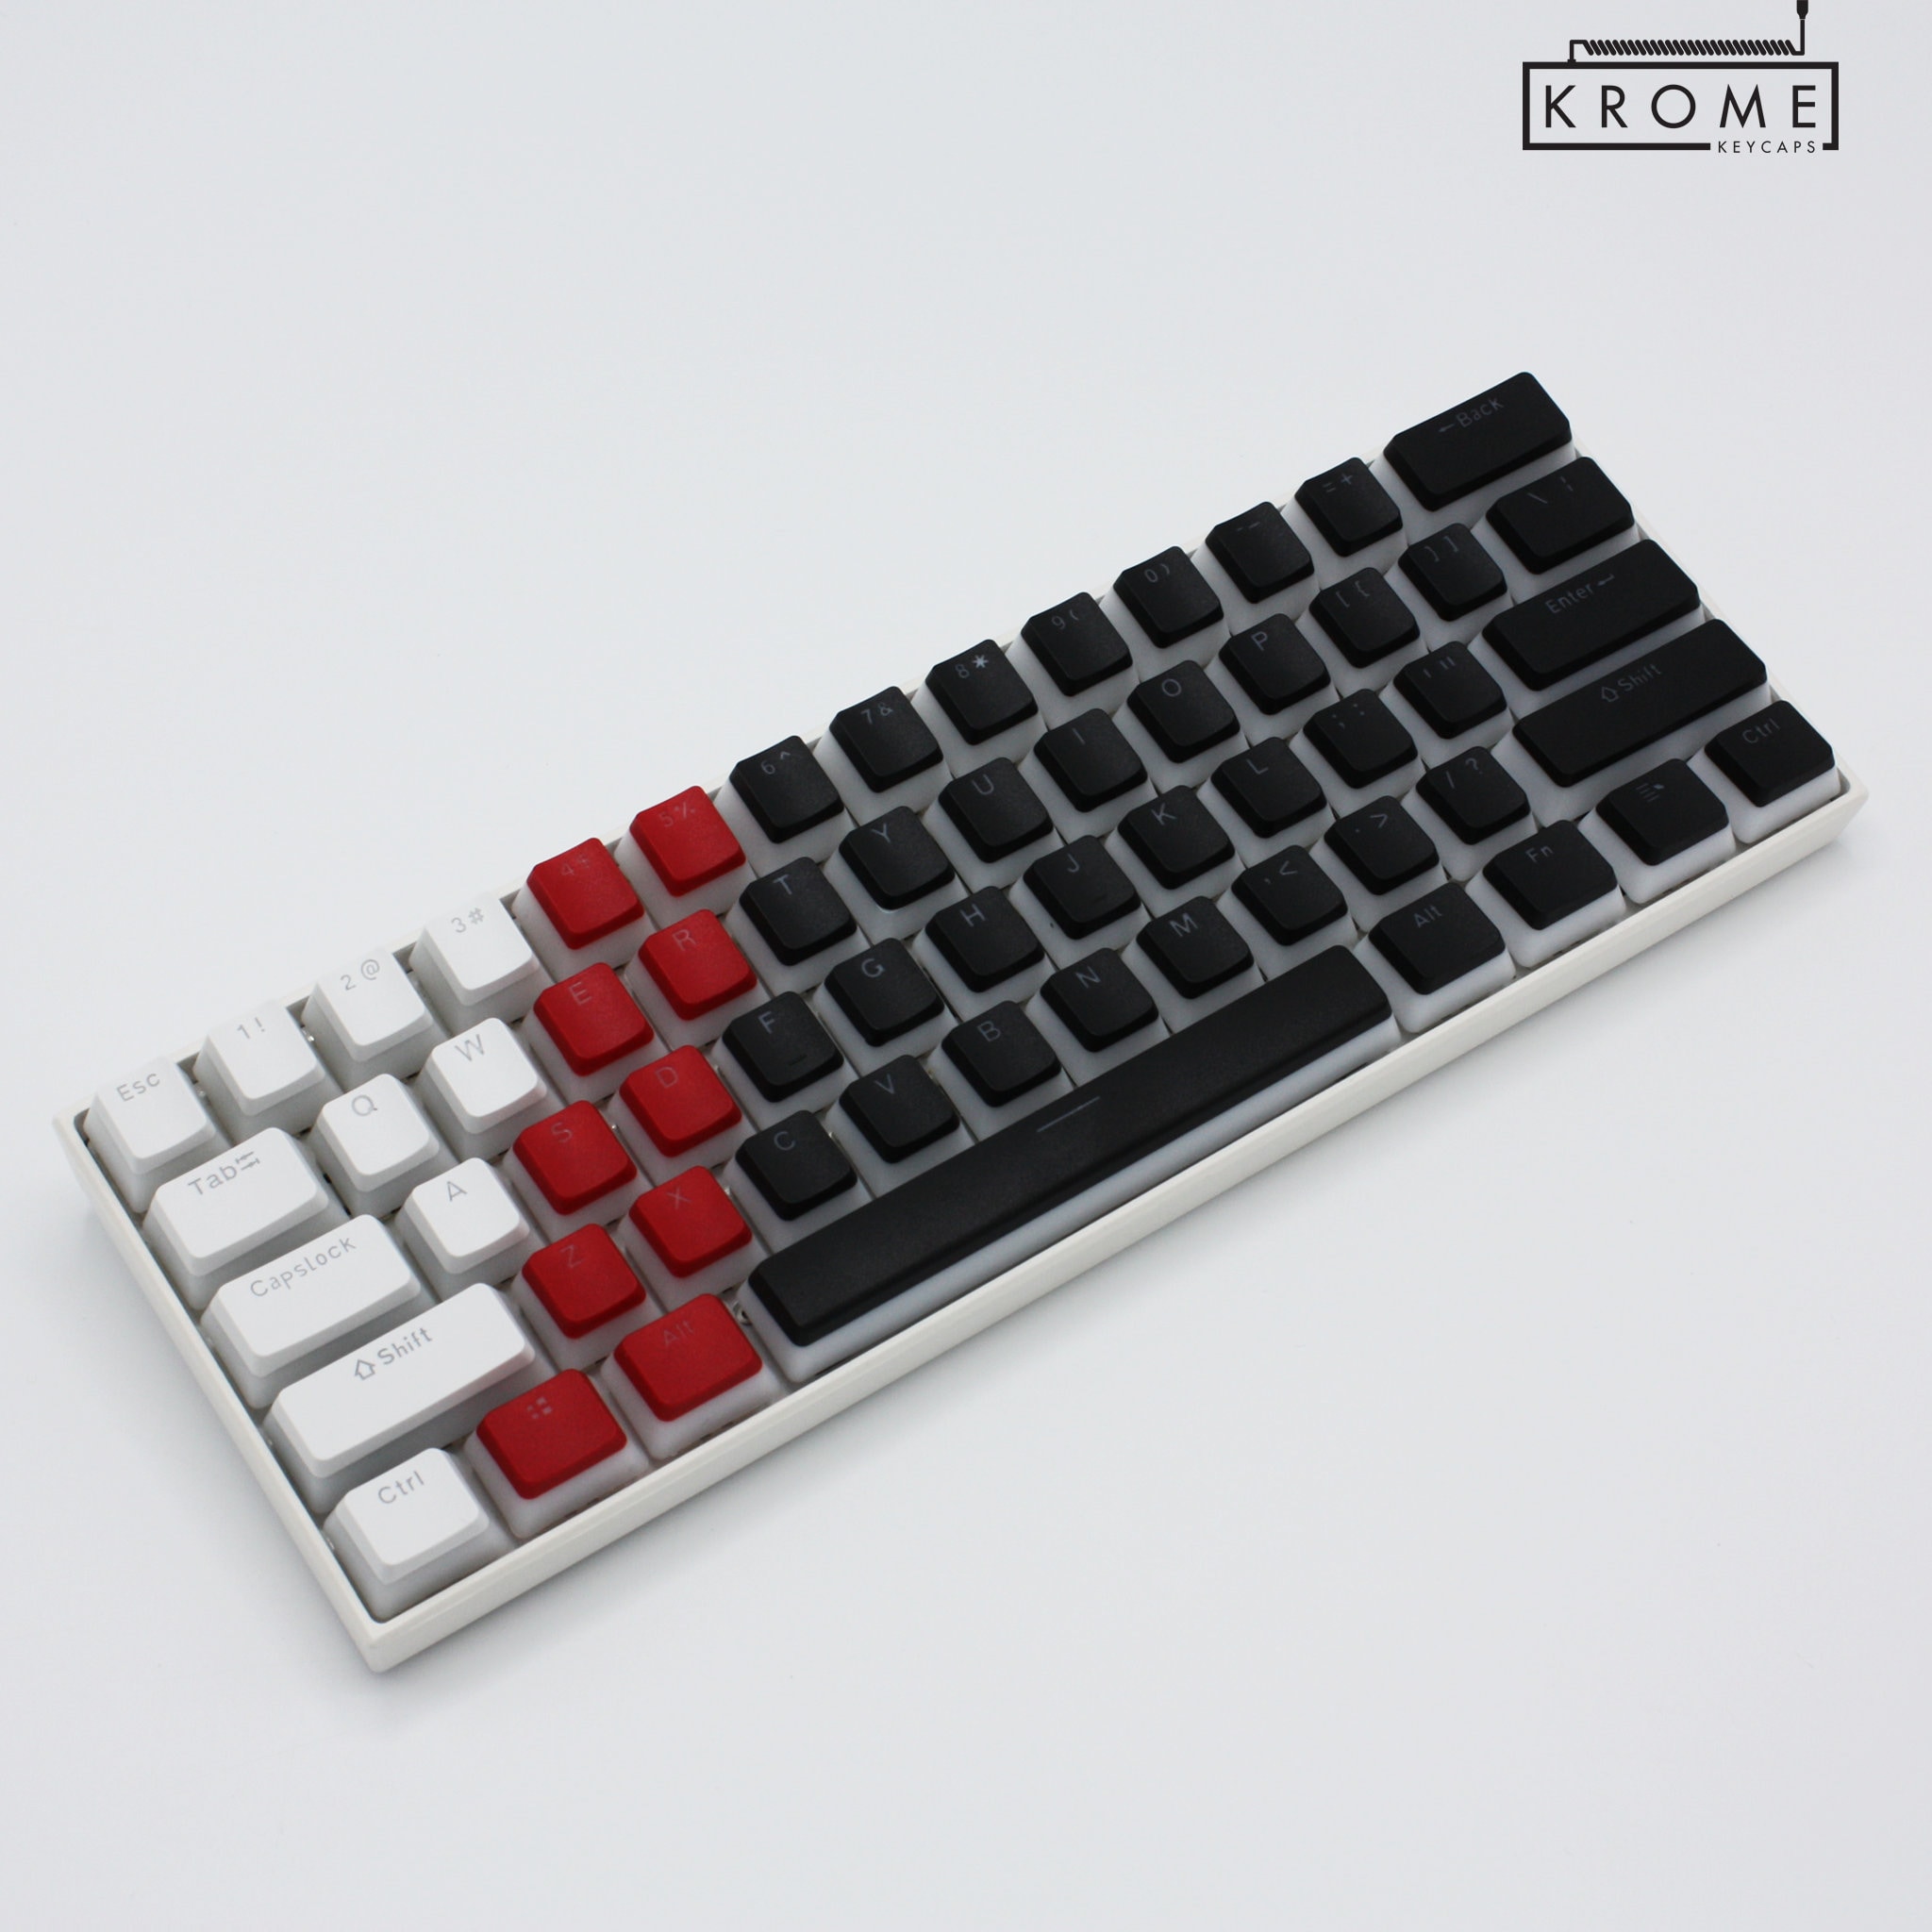 124 Keys Spanish Layout Mix Color Keycap European Type Ansi Iso Material  for Cherry MX Switches Fit Mechanical Keyboards Caps, Key Cap Set 